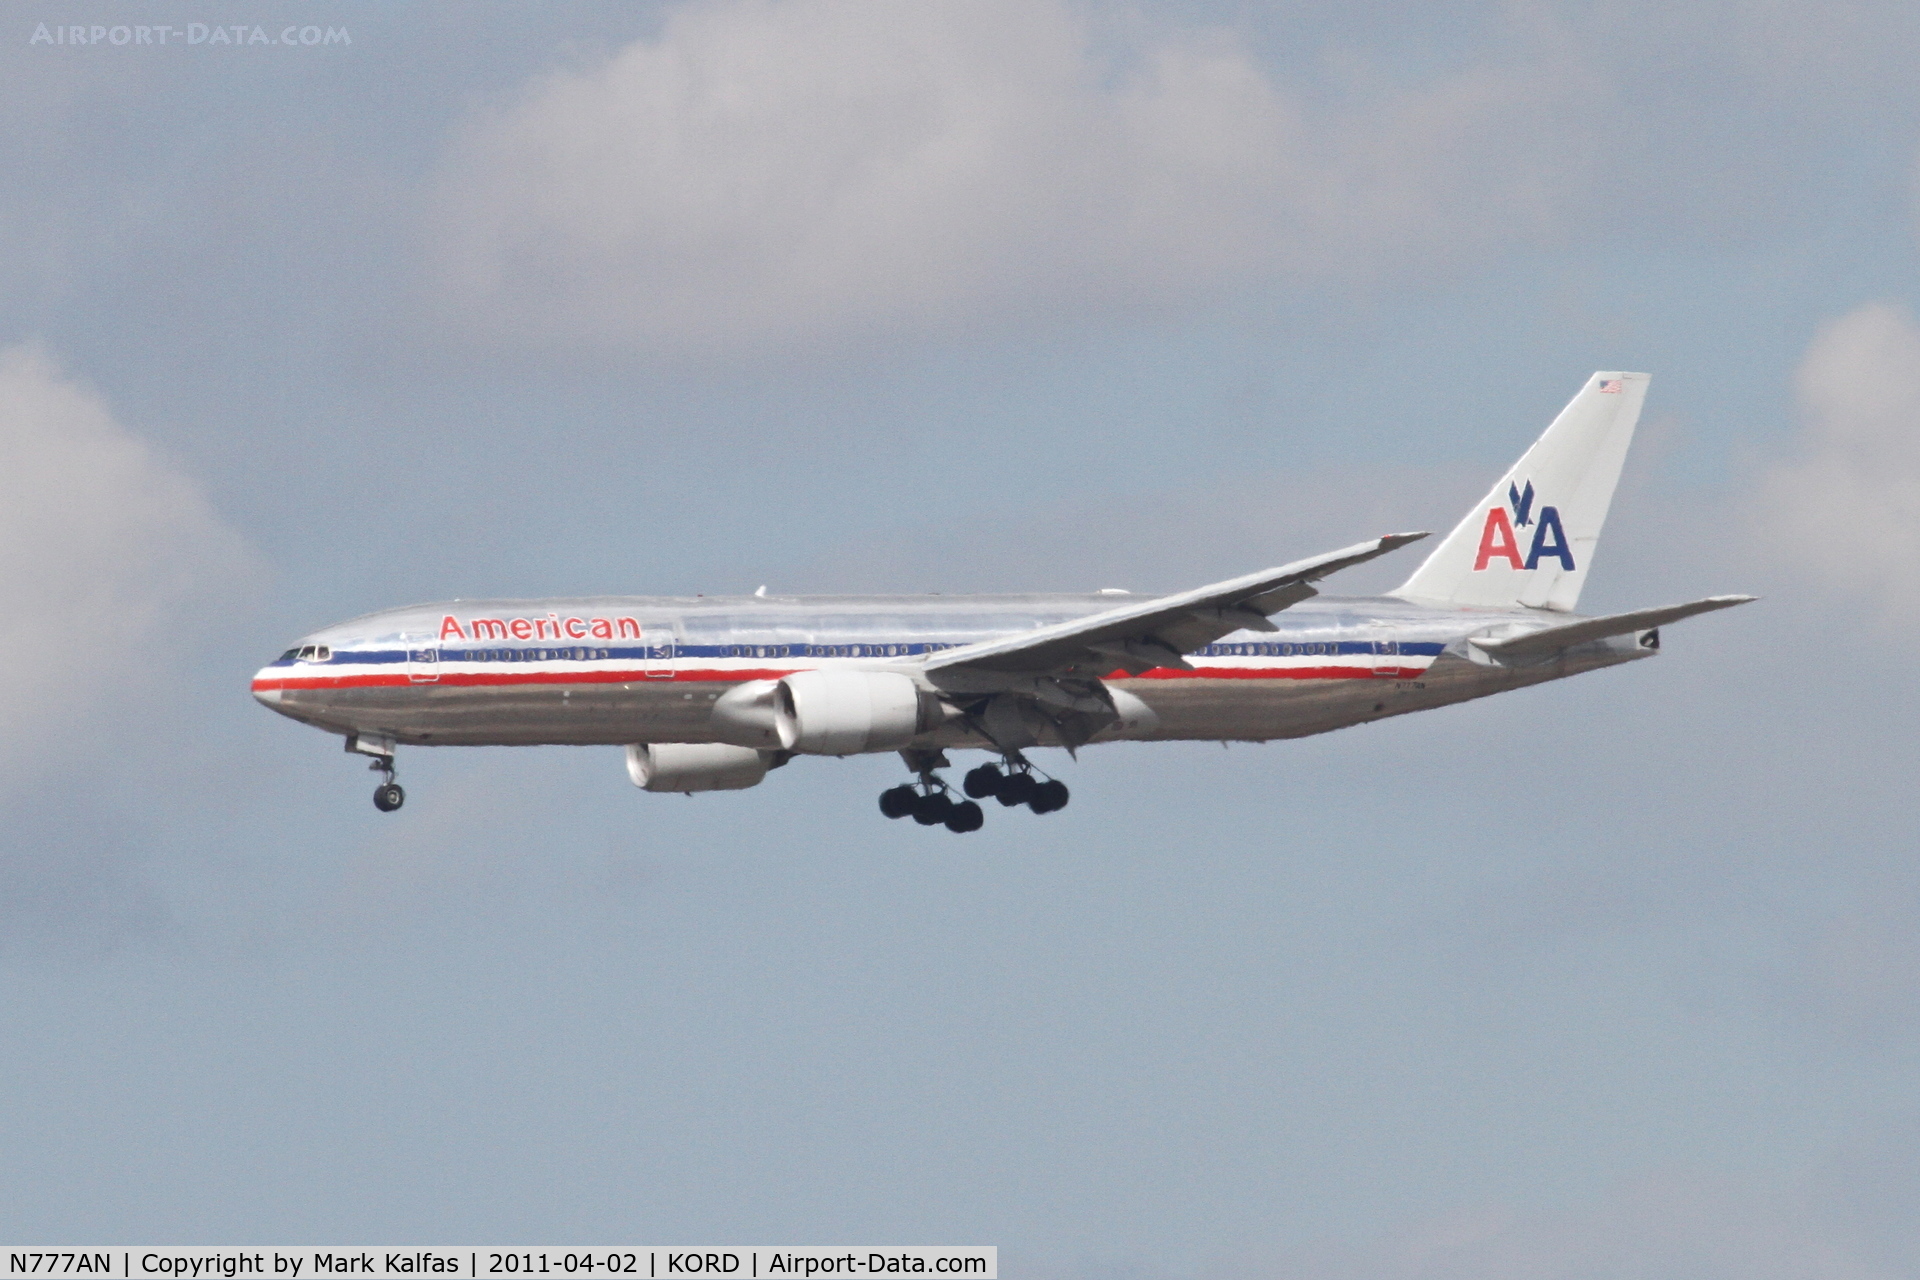 N777AN, 1999 Boeing 777-223 C/N 29585, American Airlines Boeing 777-223, AAL47 arriving from EGLL, on approach RWY 27L KORD.